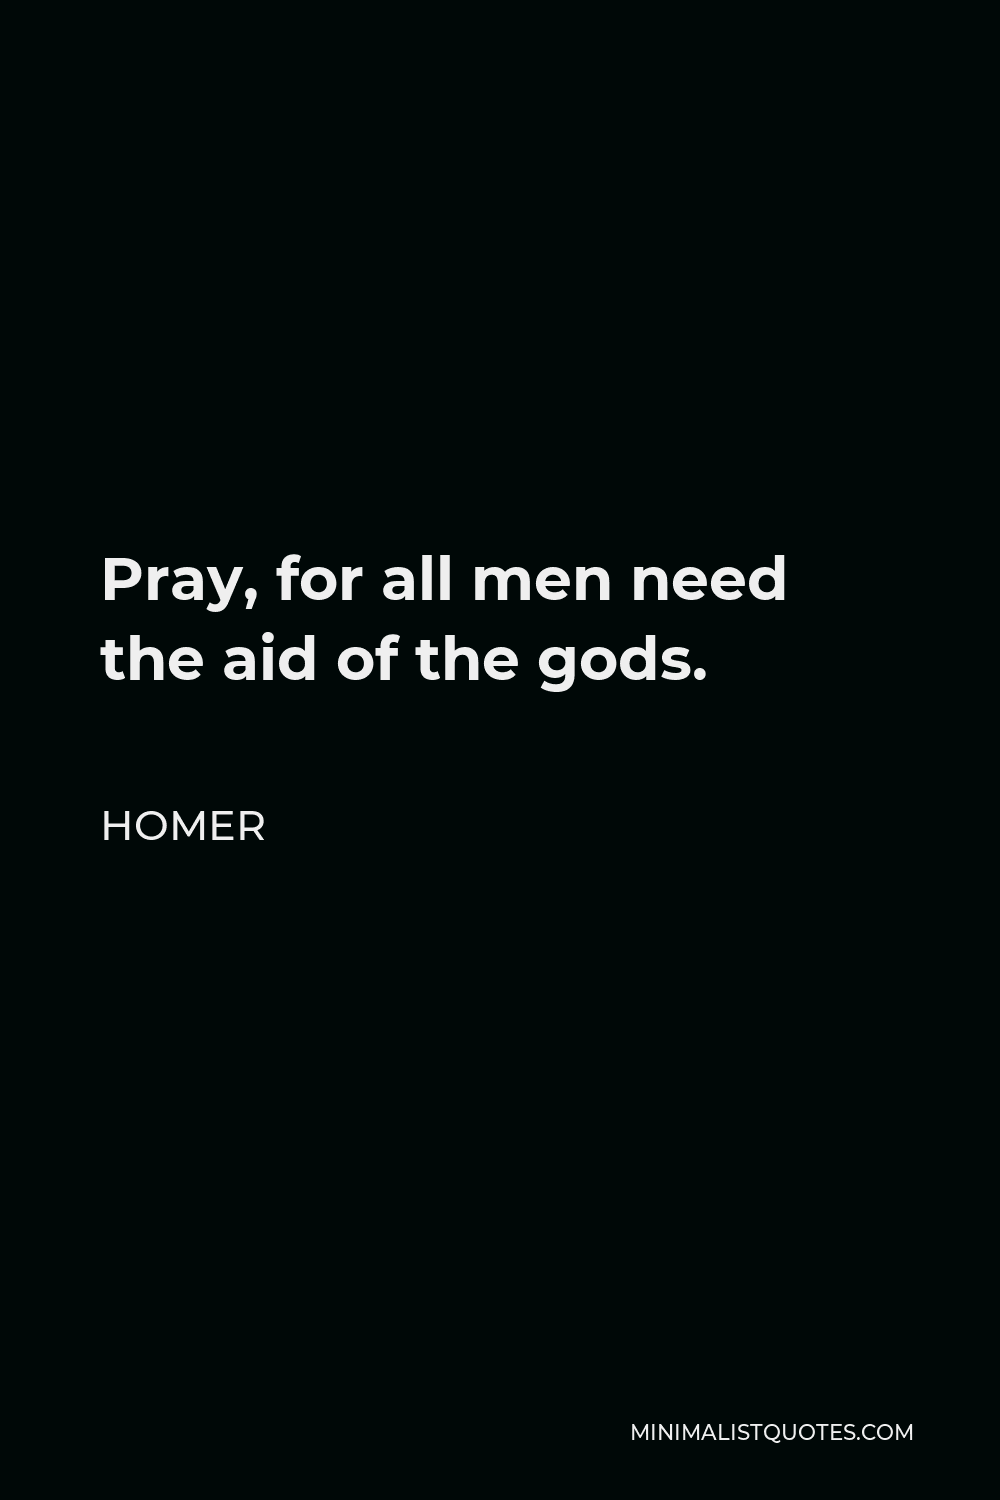 Homer Quote - Pray, for all men need the aid of the gods.